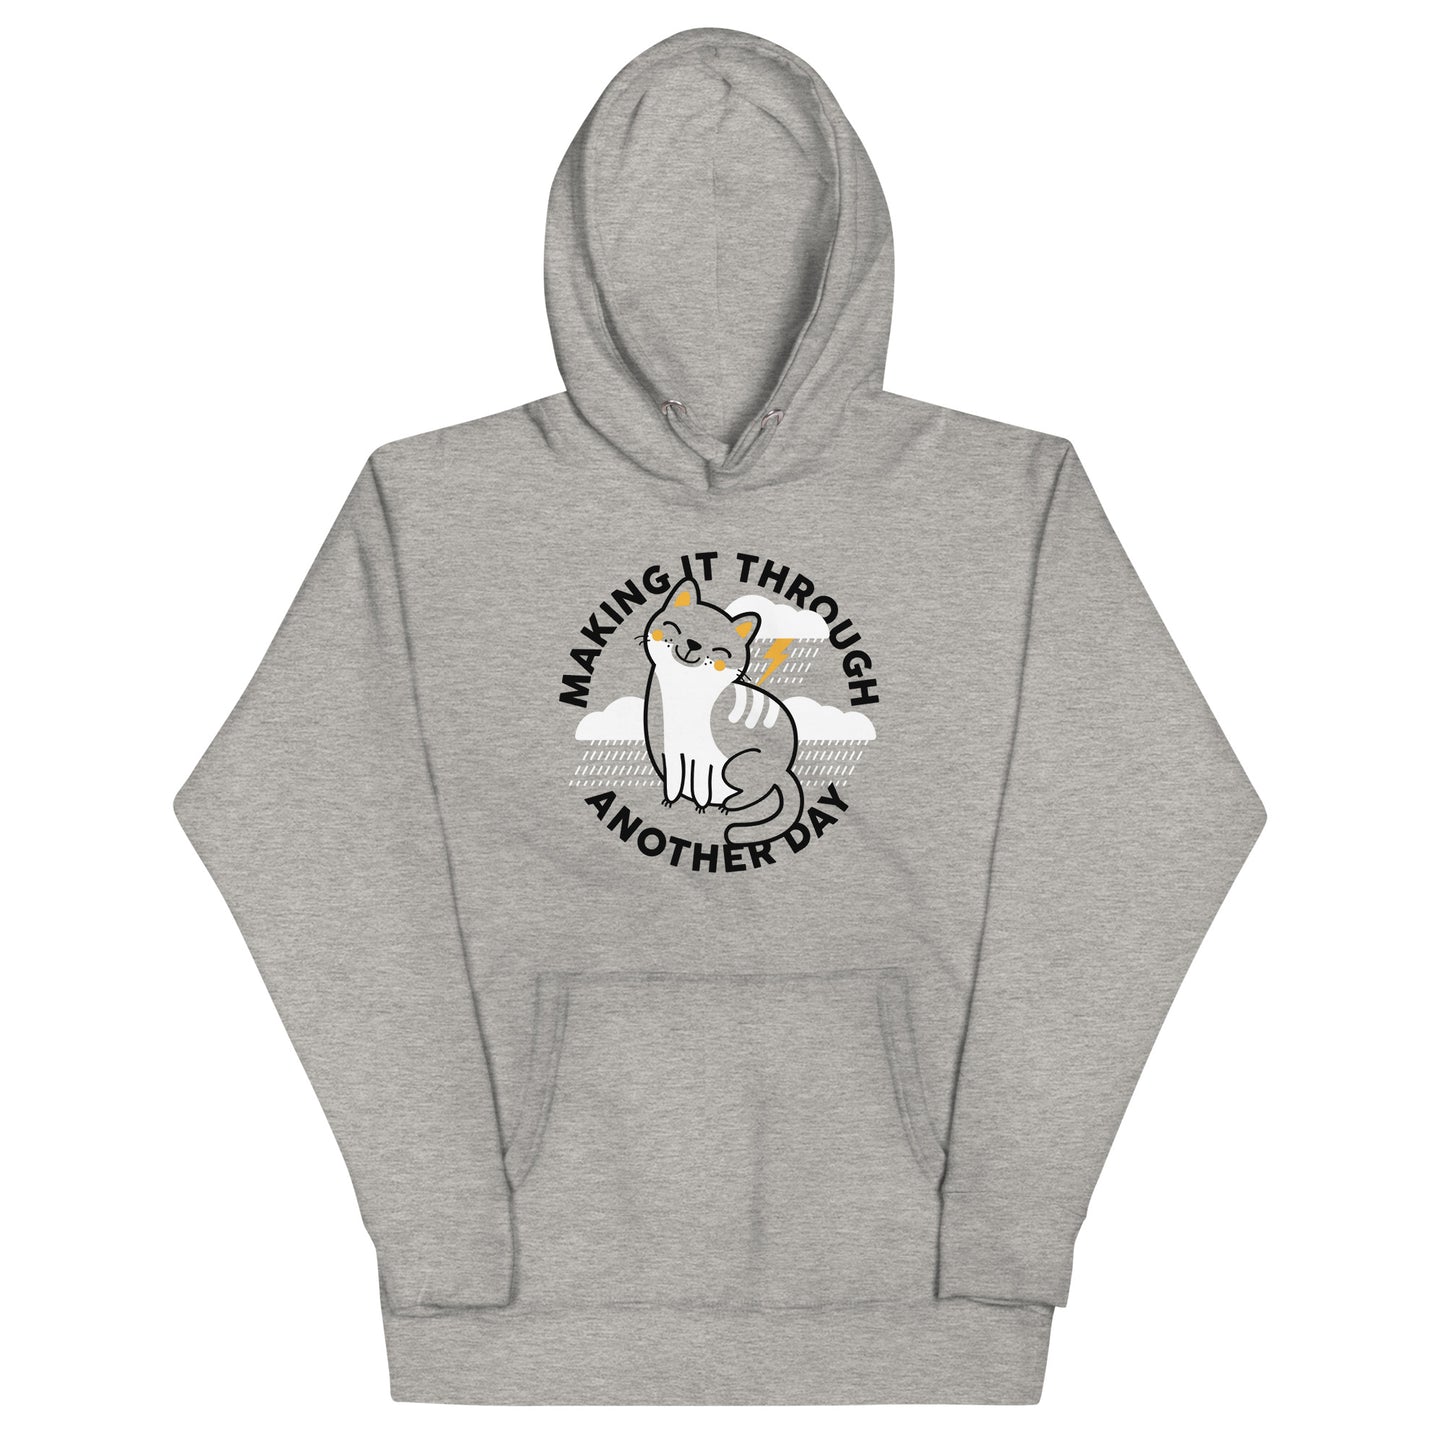 Making It Through Another Day Unisex Hoodie